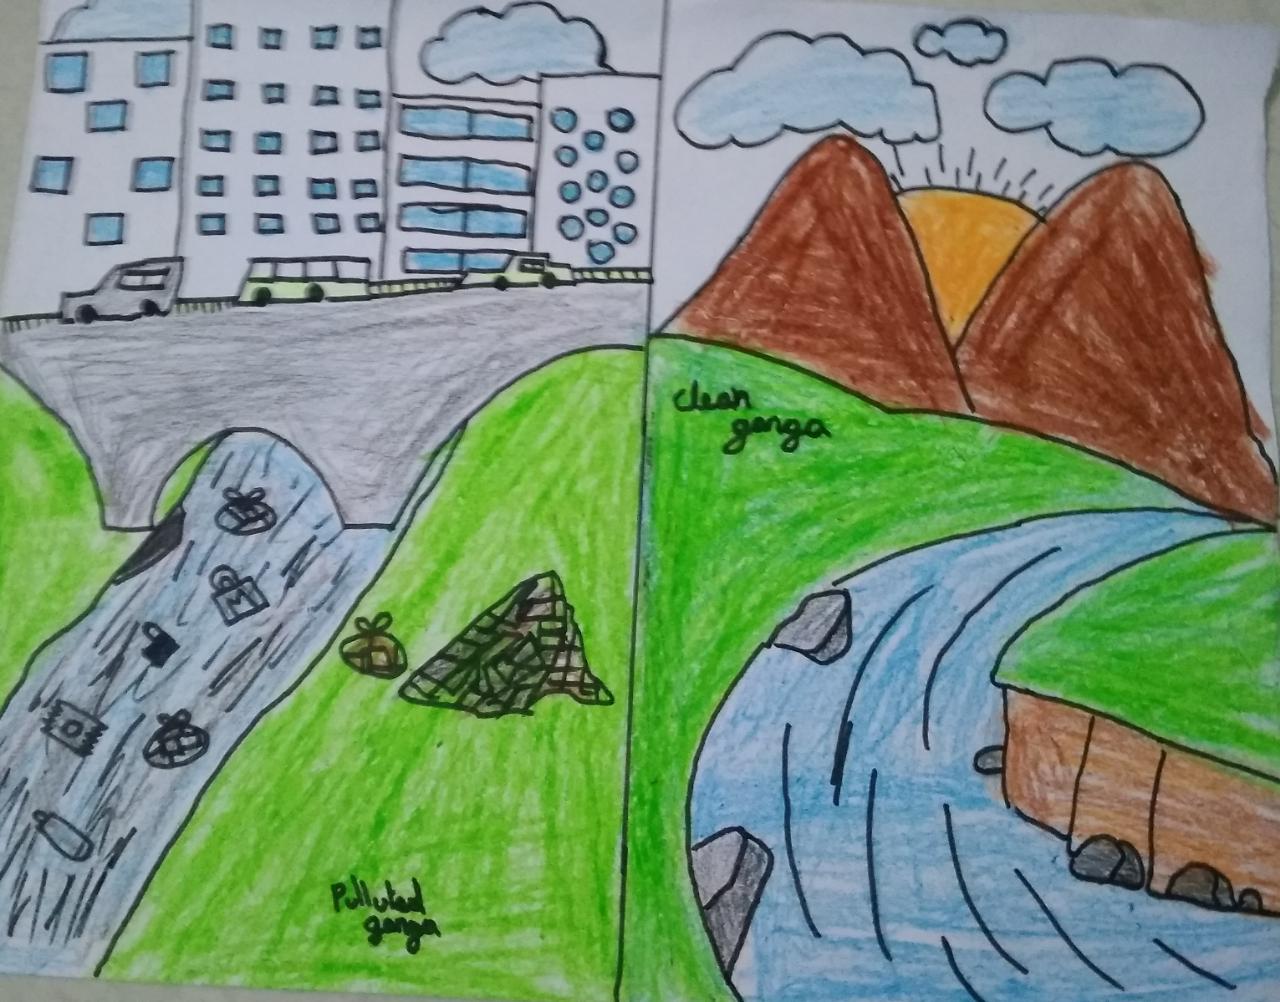 can i get a drawing for my idea to clean ganga - Brainly.in